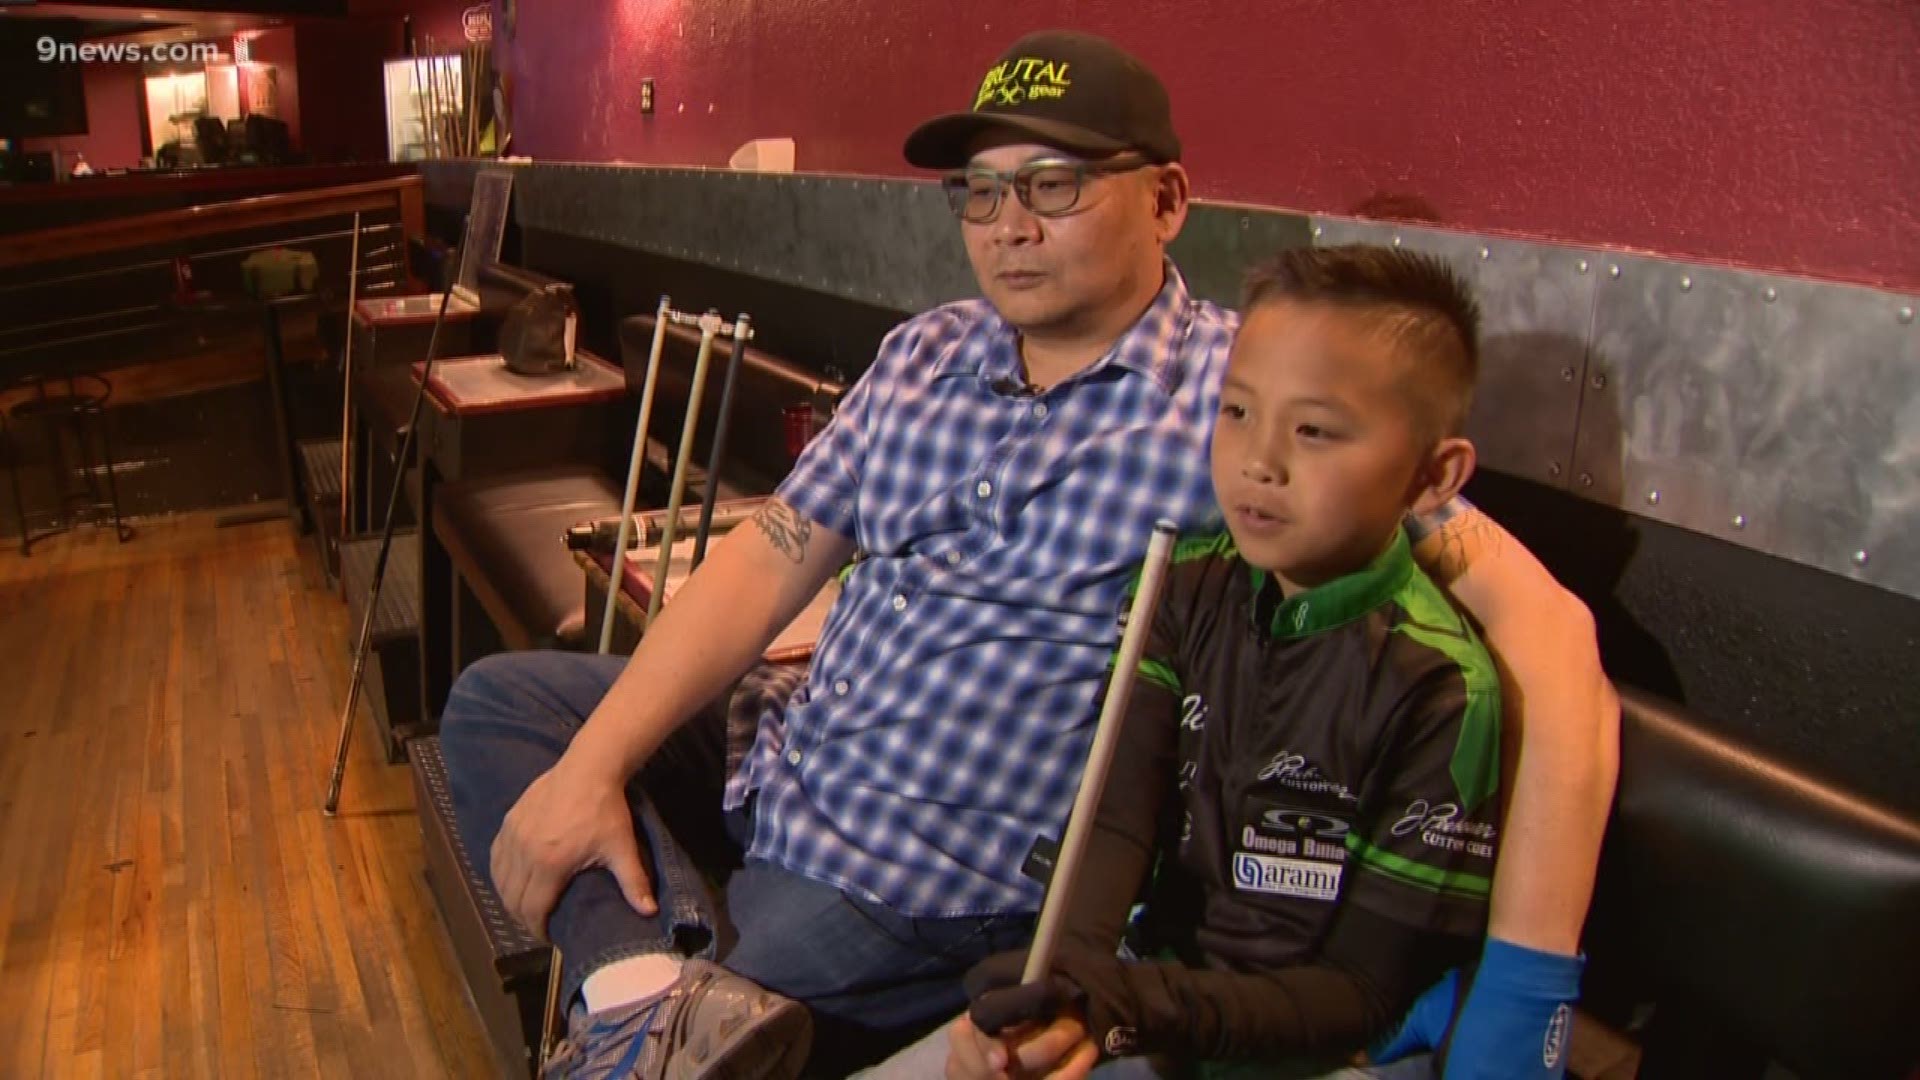 Nine-year-old Jin Powell can beat just about any adult that walks into Englewood's Felt Billiard bar, and he's moving up the national rankings in his age group, too.